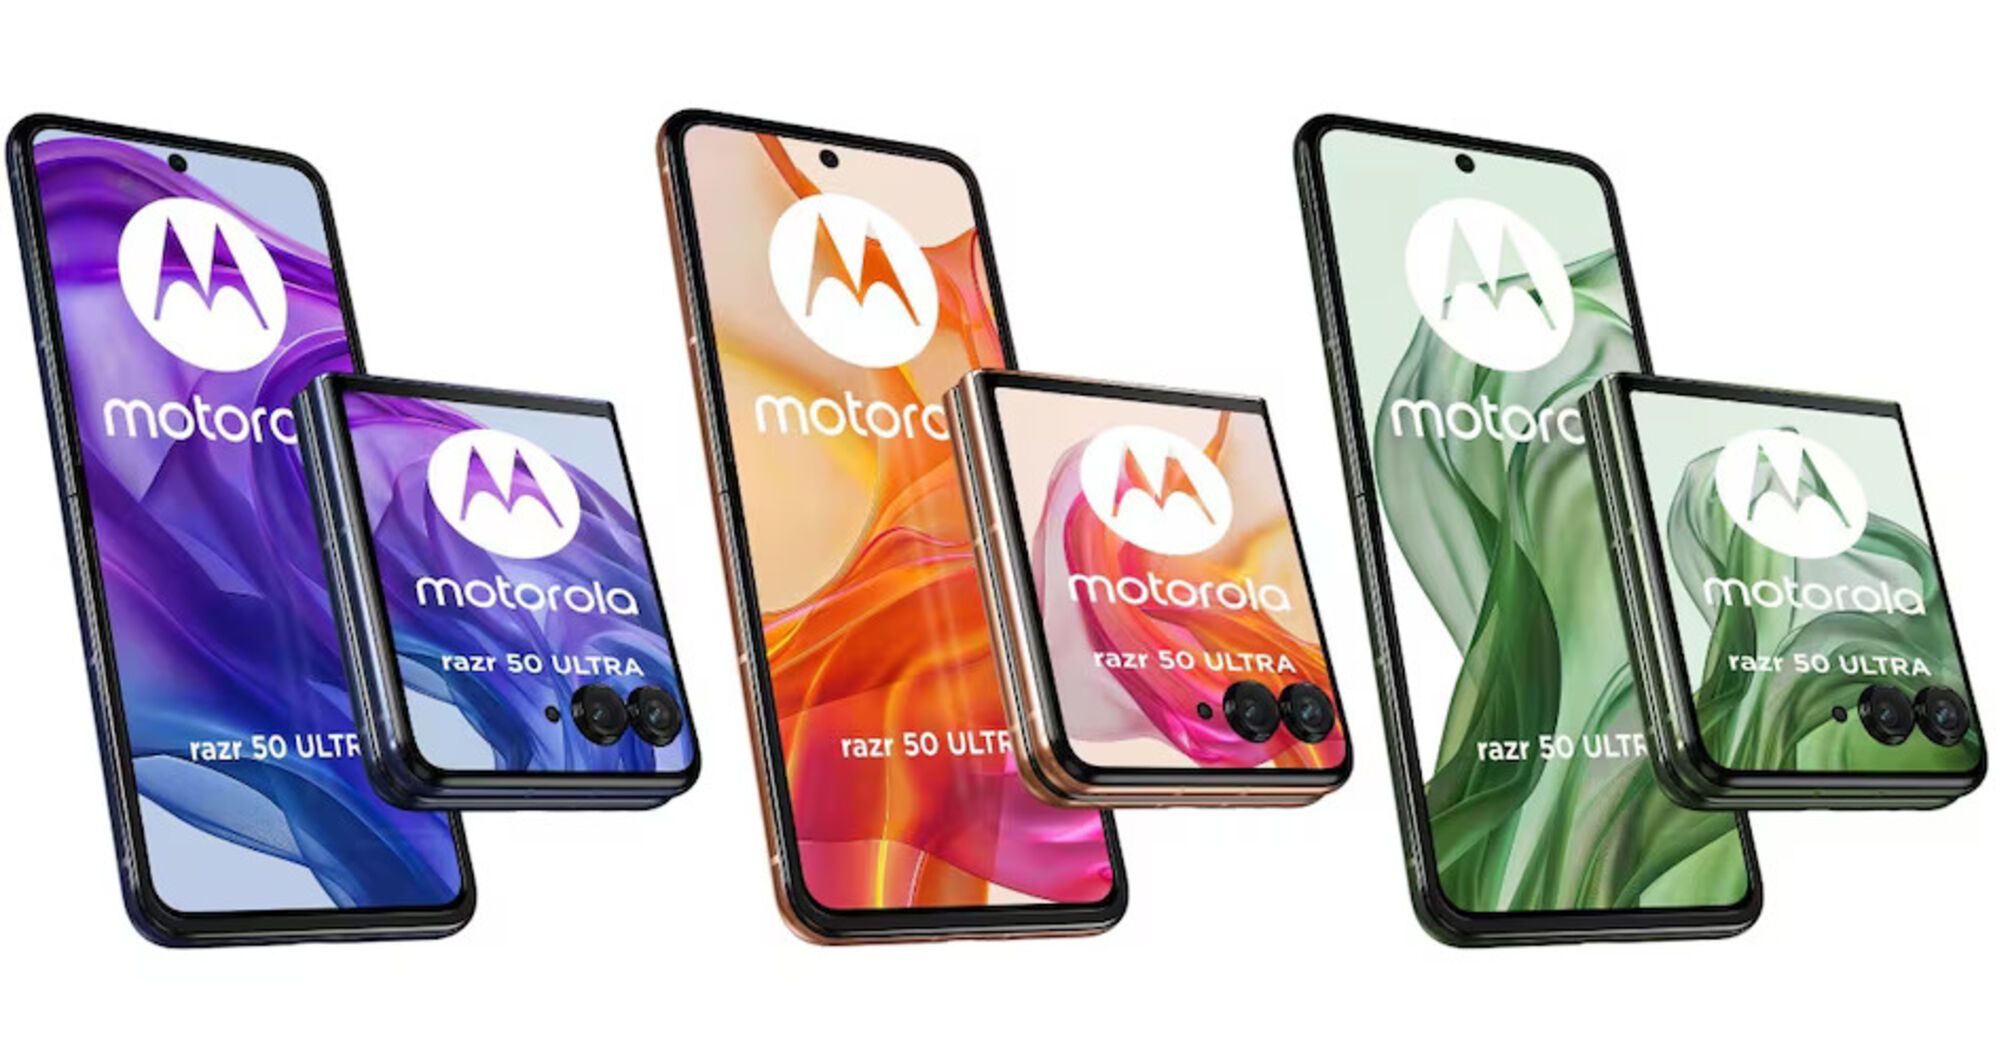 Motorola's upcoming foldable handsets, the Razr 50 and Razr 50 Ultra, have been confirmed